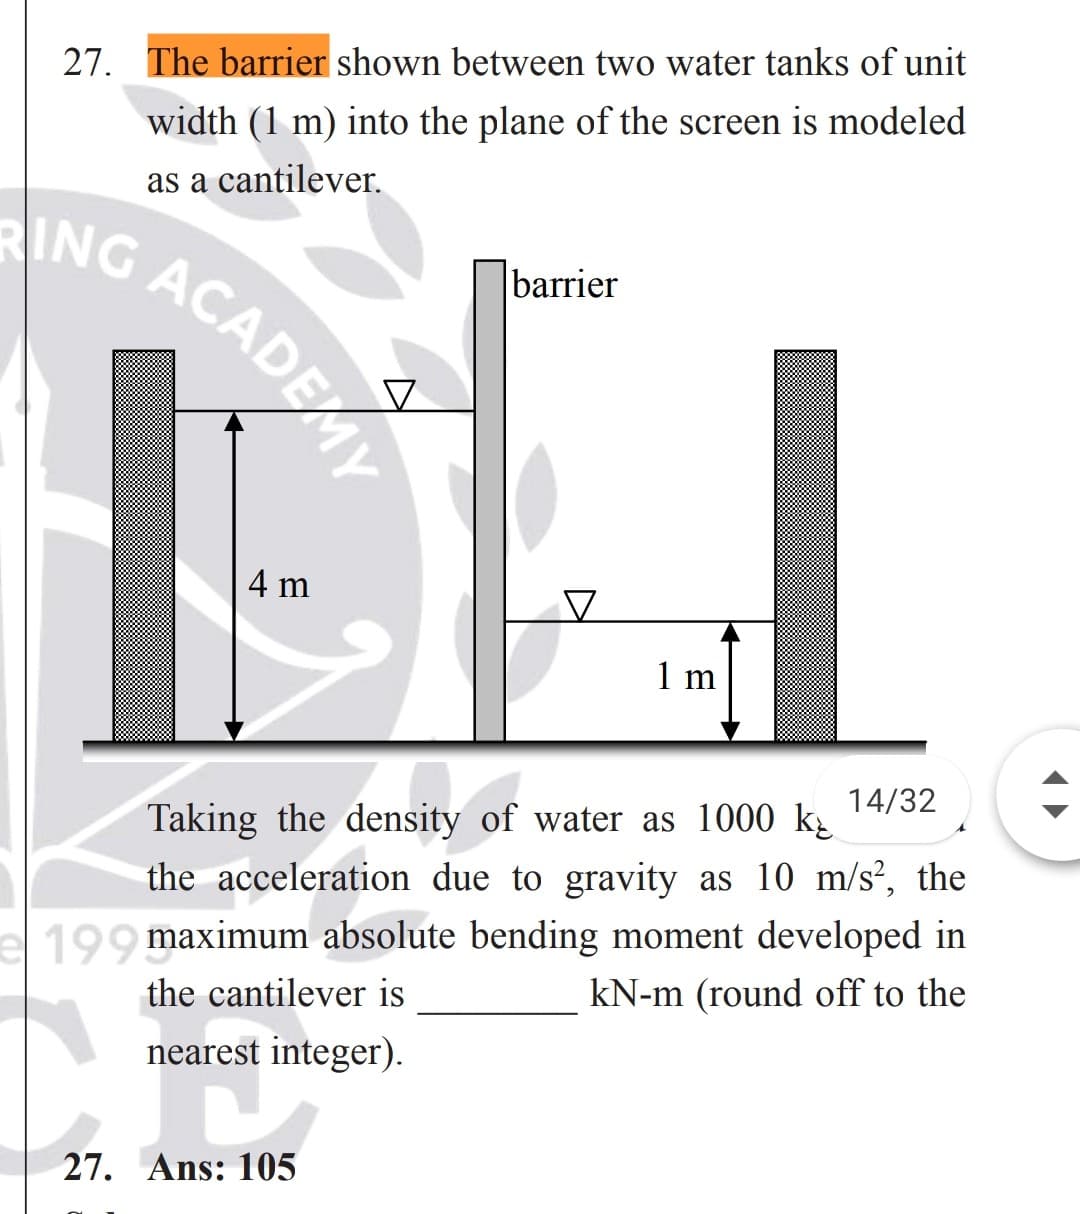 27. The barrier shown between two water tanks of unit
width (1 m) into the plane of the screen is modeled
as a cantilever.
barrier
G ACADEMY
4 m
1 m
14/32
Taking the density of water as 1000 k
the acceleration due to gravity as 10 m/s², the
99 maximum absolute bending moment developed in
kN-m (round off to the
the cantilever is
nearest integer).
